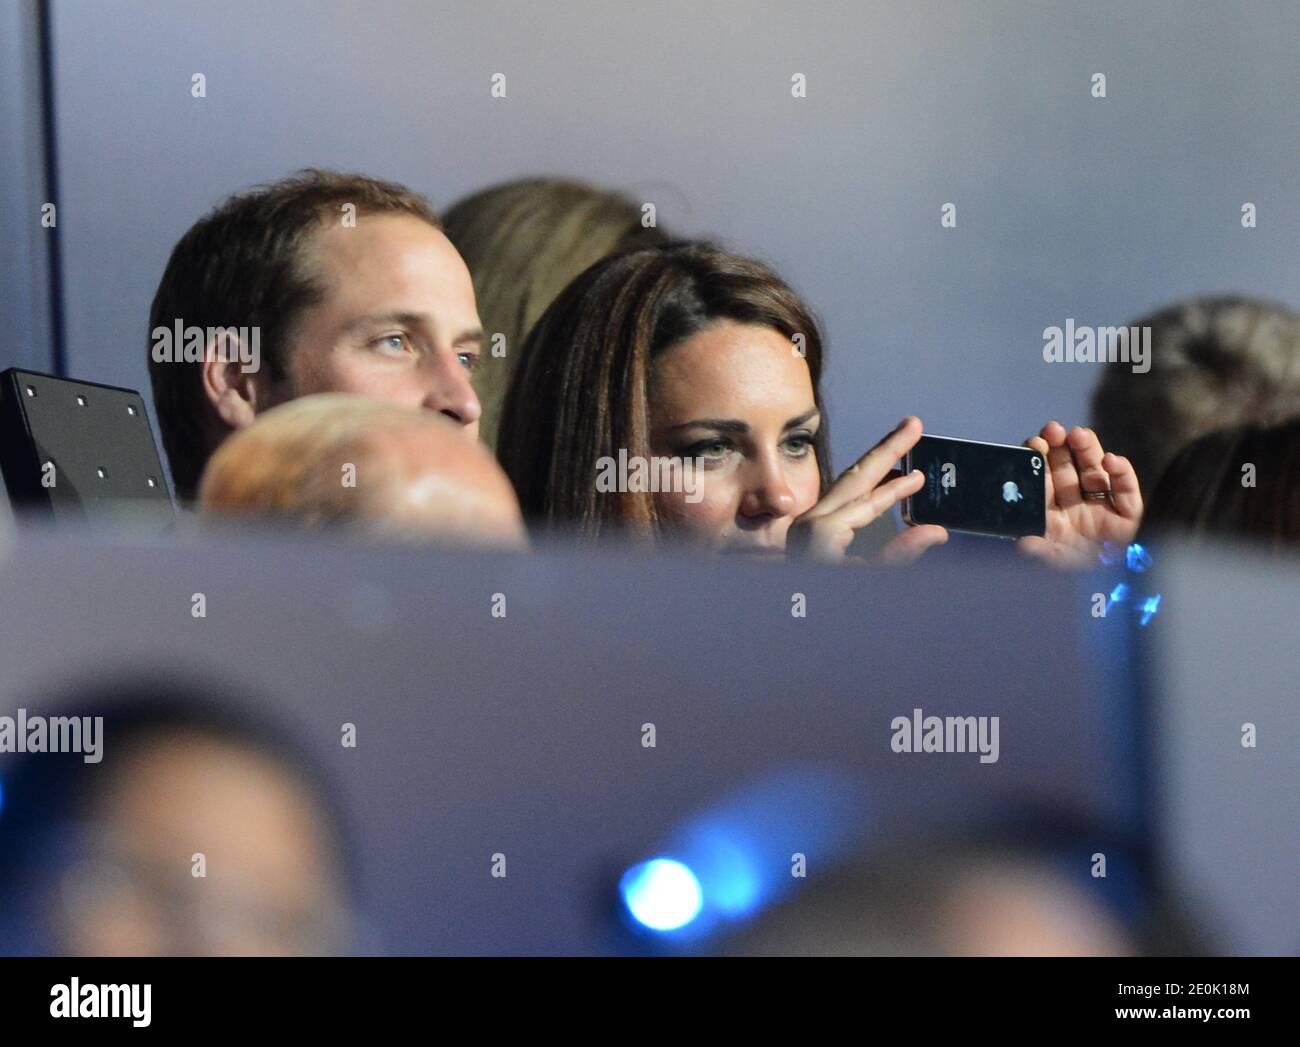 Britain's Prince William and Catherine, the Duke and Duchess of Cambridge during the London Olympic Games 2012 Opening Ceremony at the Olympic Stadium, London Olympic Games in London, UK on July 27, 2012. Photo by ABACAPRESS.COM Stock Photo